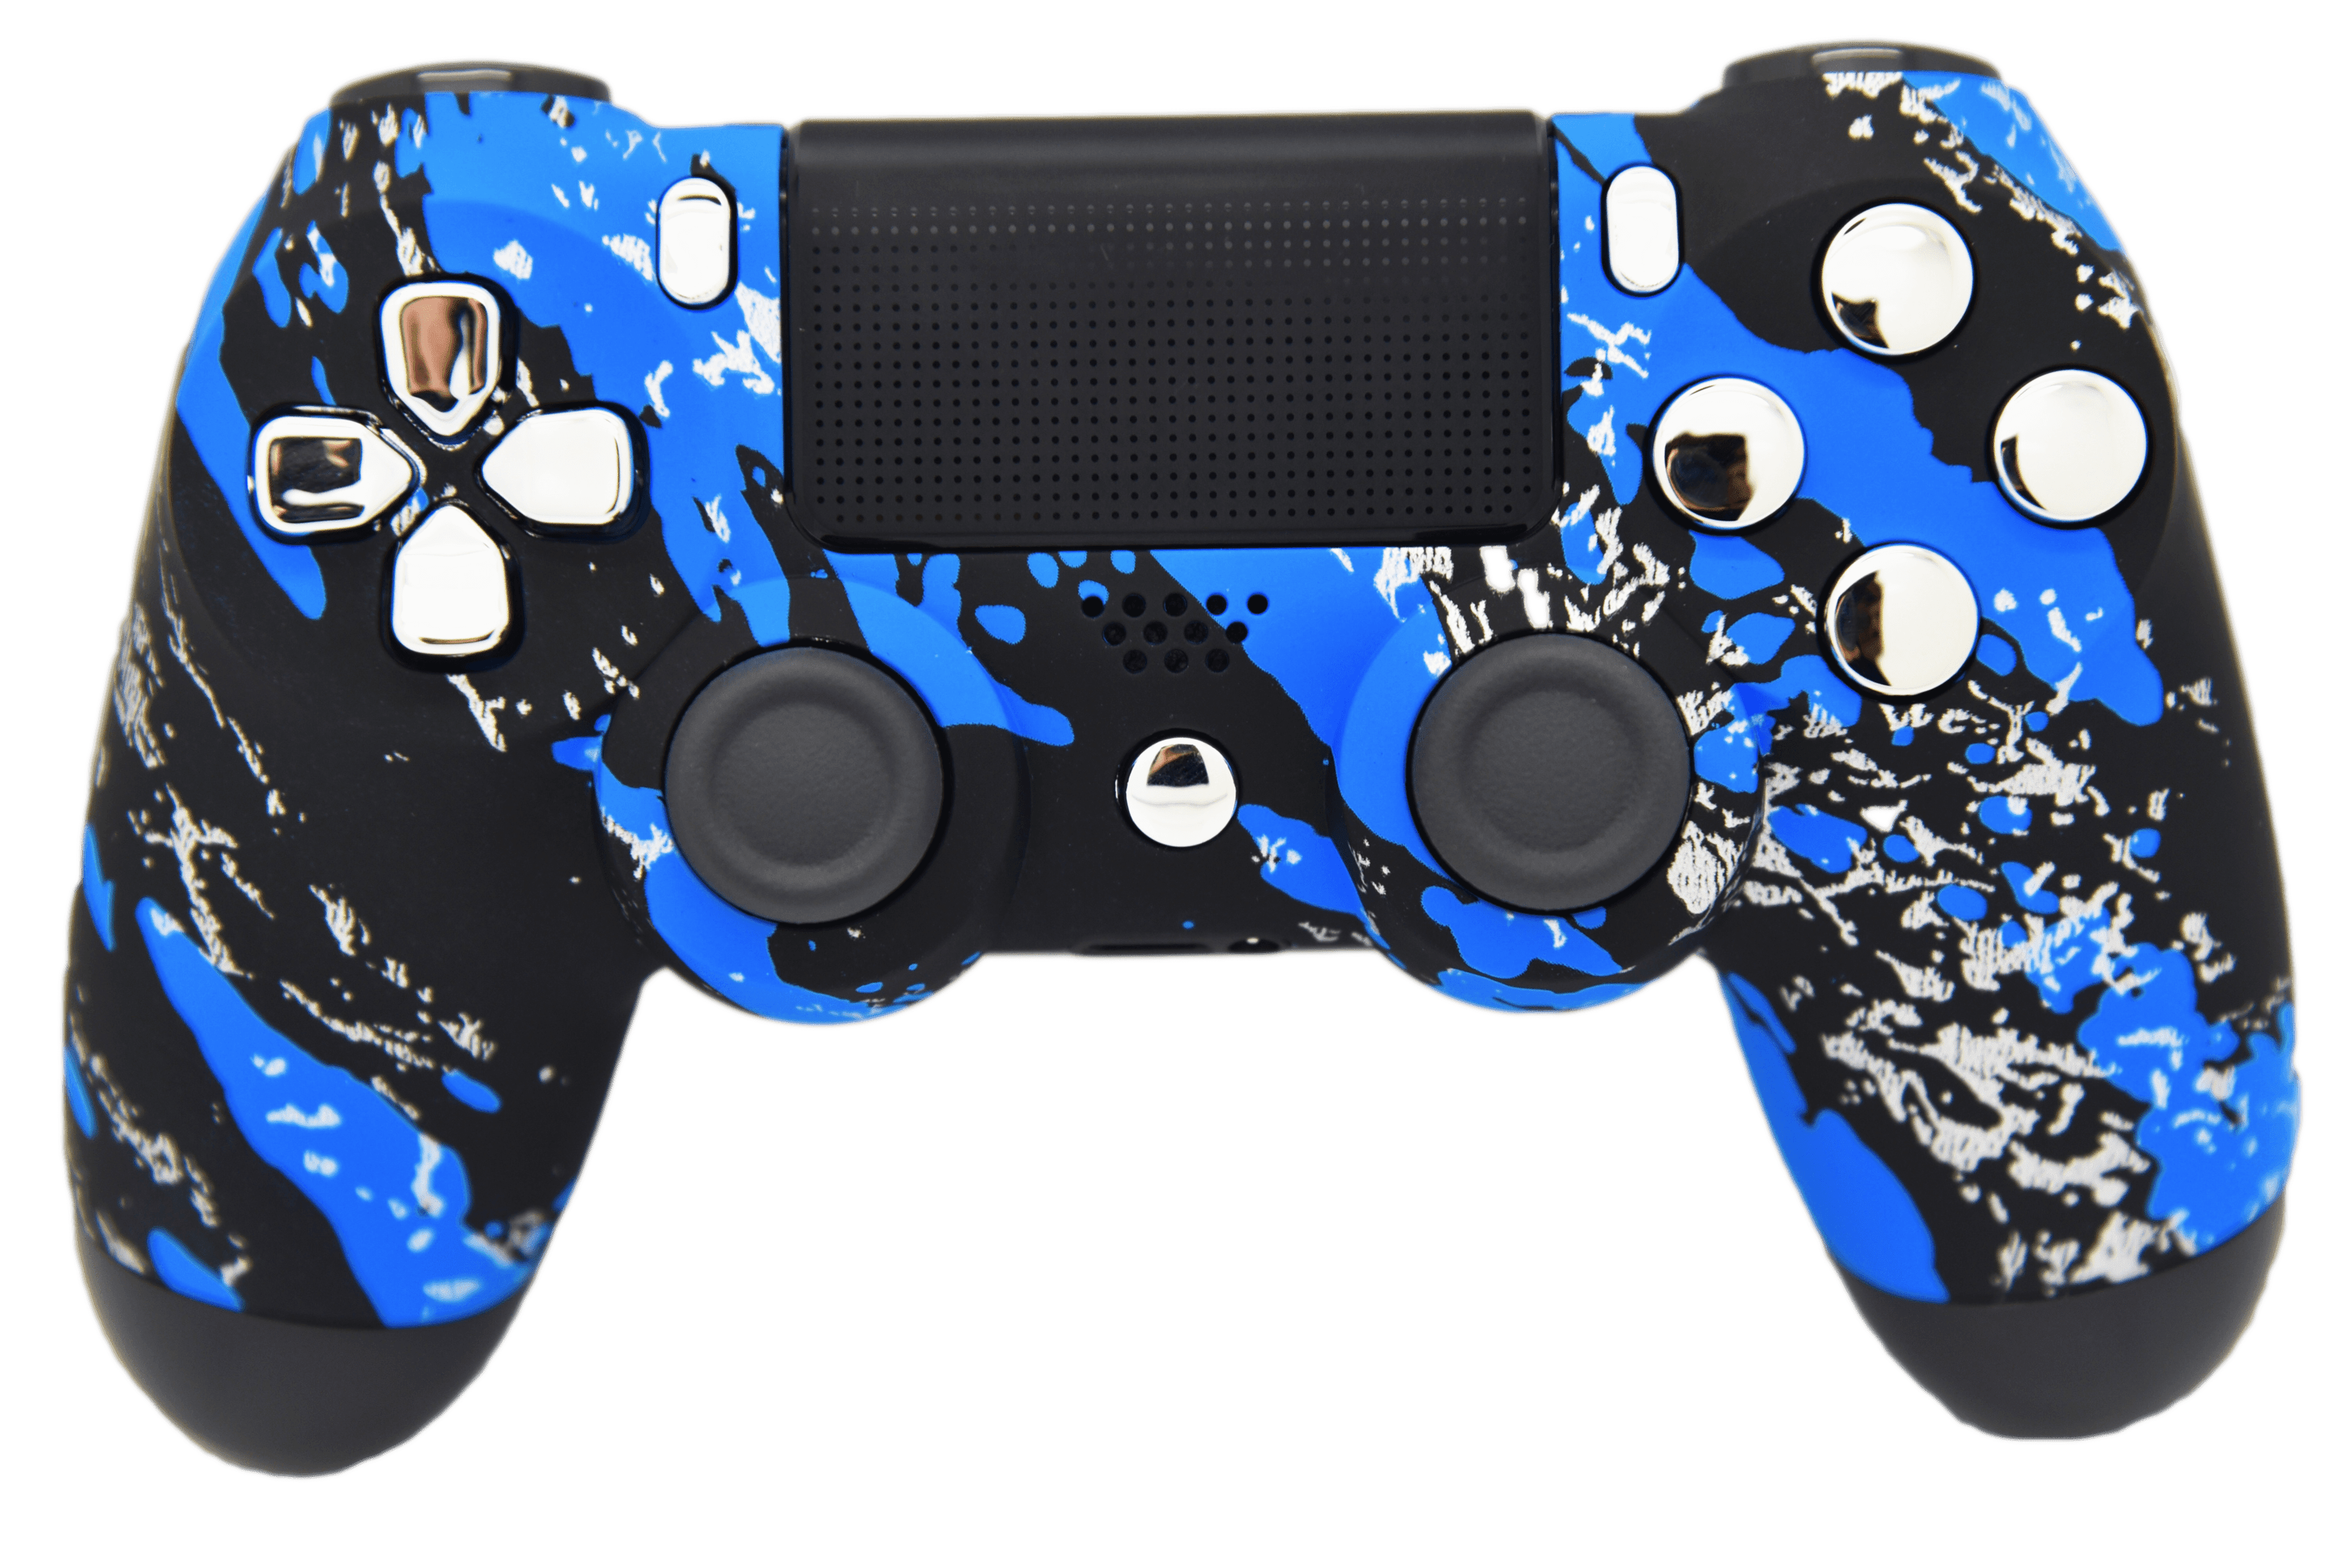 Sony PLAYSTATION 4 Controller PNG. Джойстик ps4 Рапид. Dualshock 4 Cod. PLAYSTATION 4 Joystick PNG.